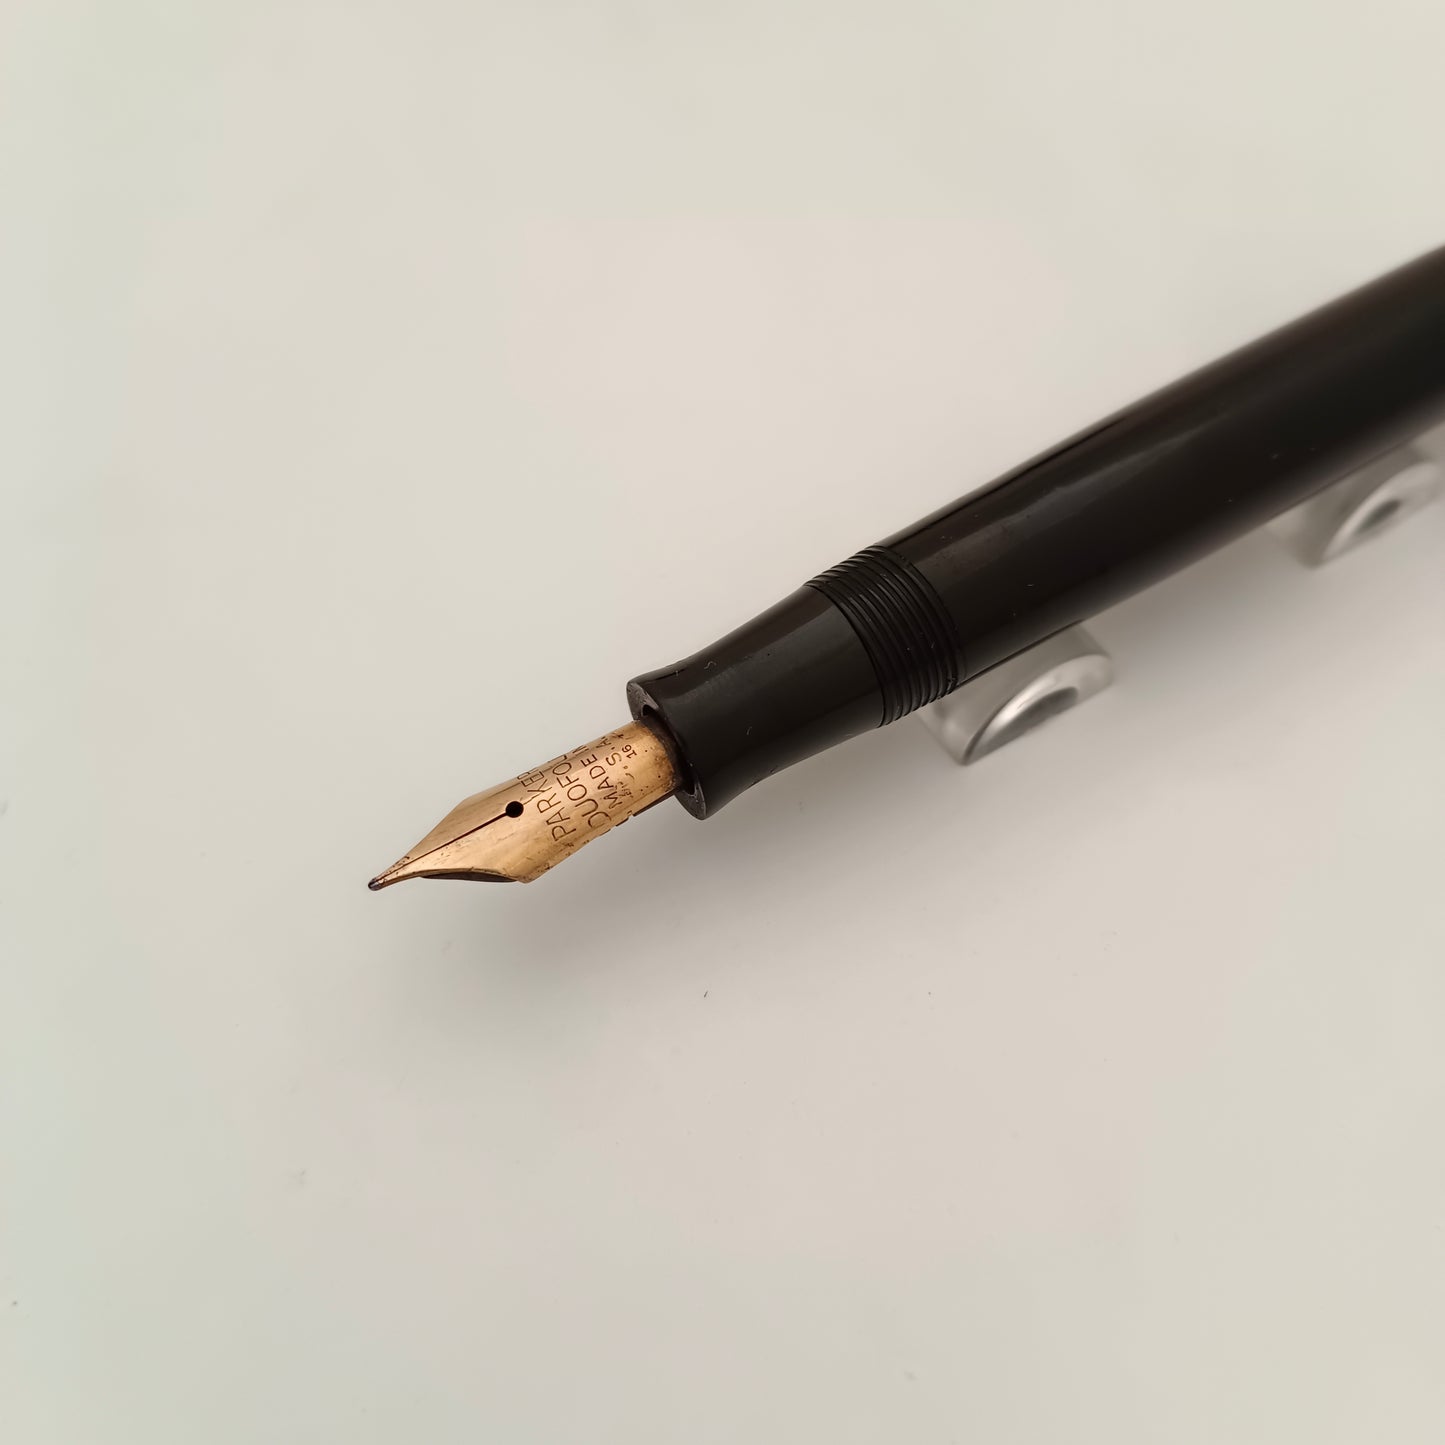 Vintage Parker Duofold Black with Gold trim Fountain Pen